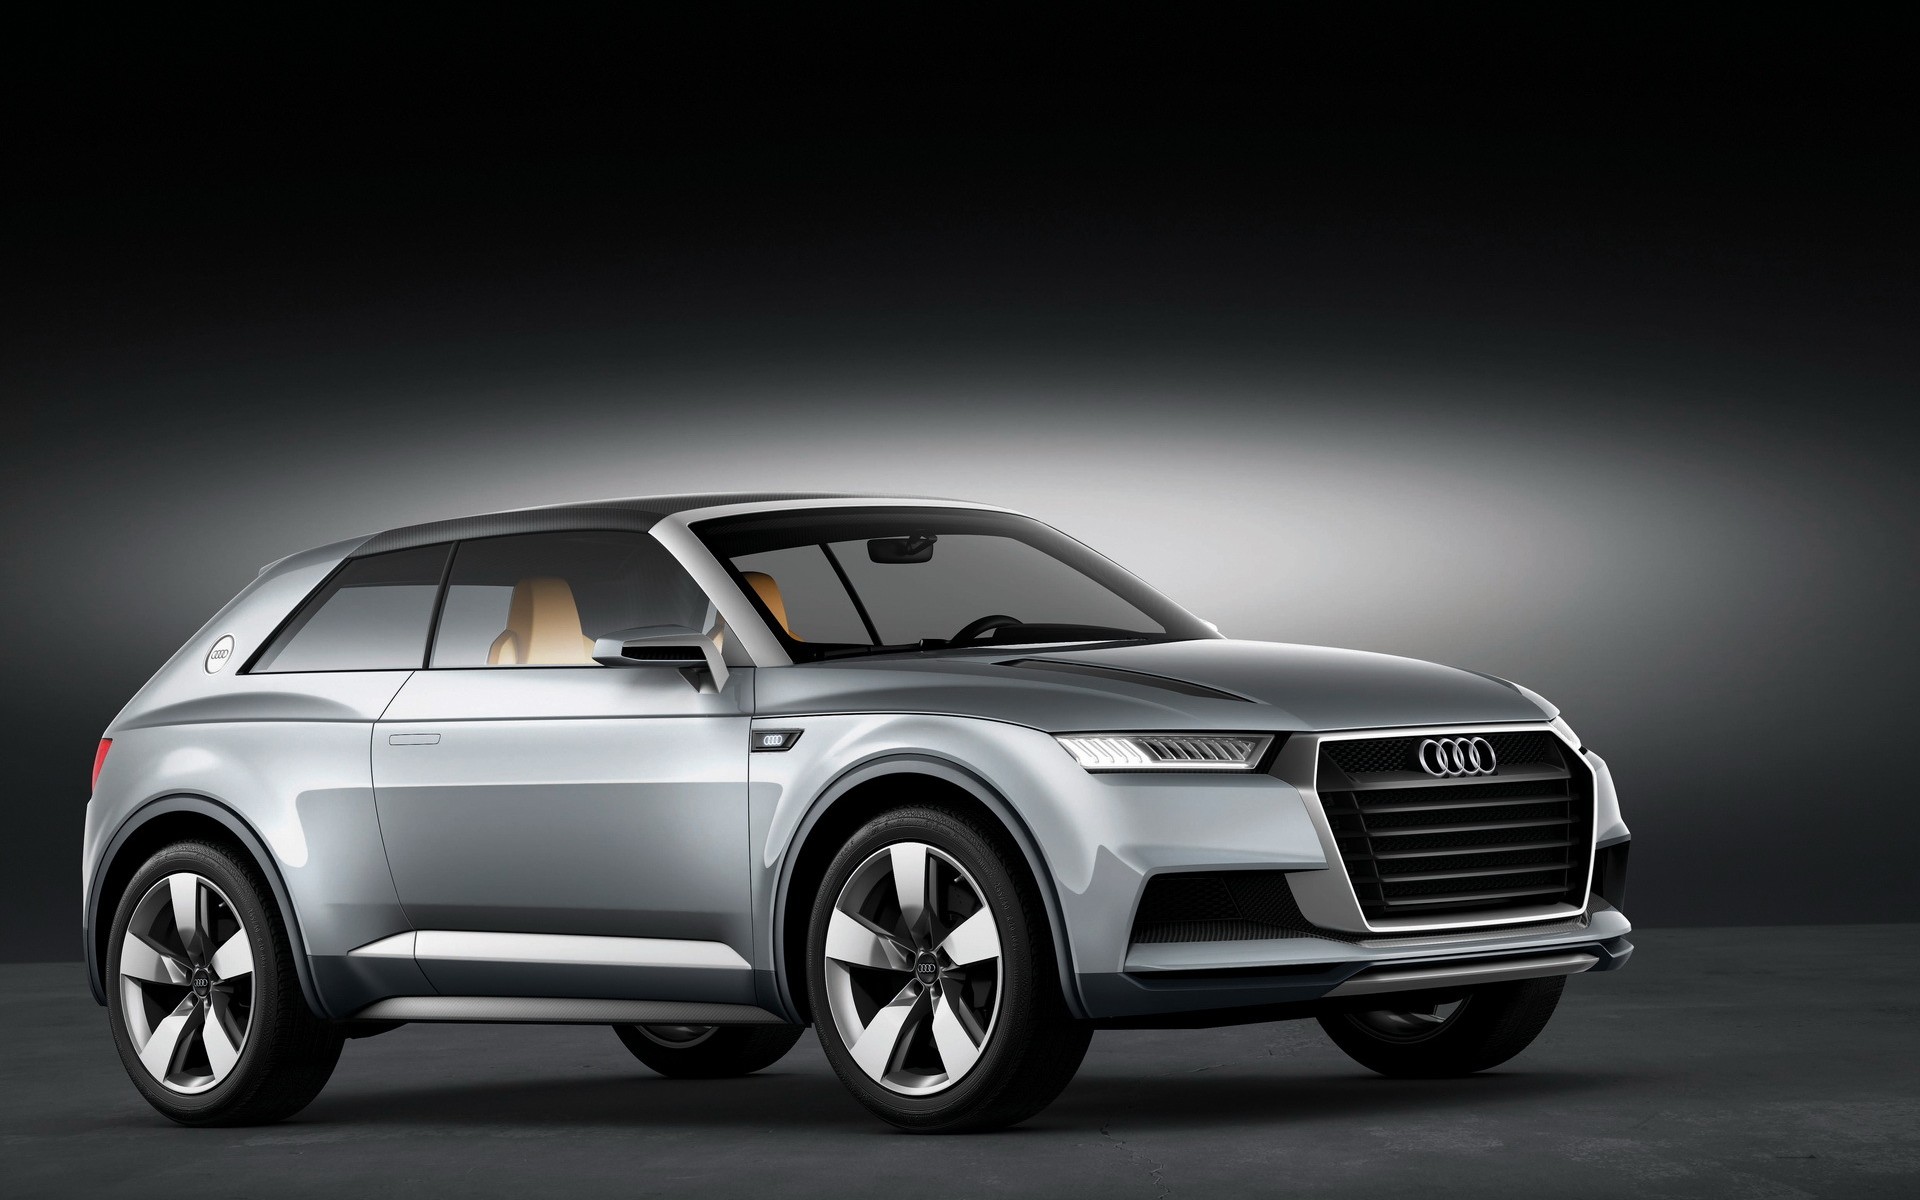 Wallpapers audi concept crossover on the desktop